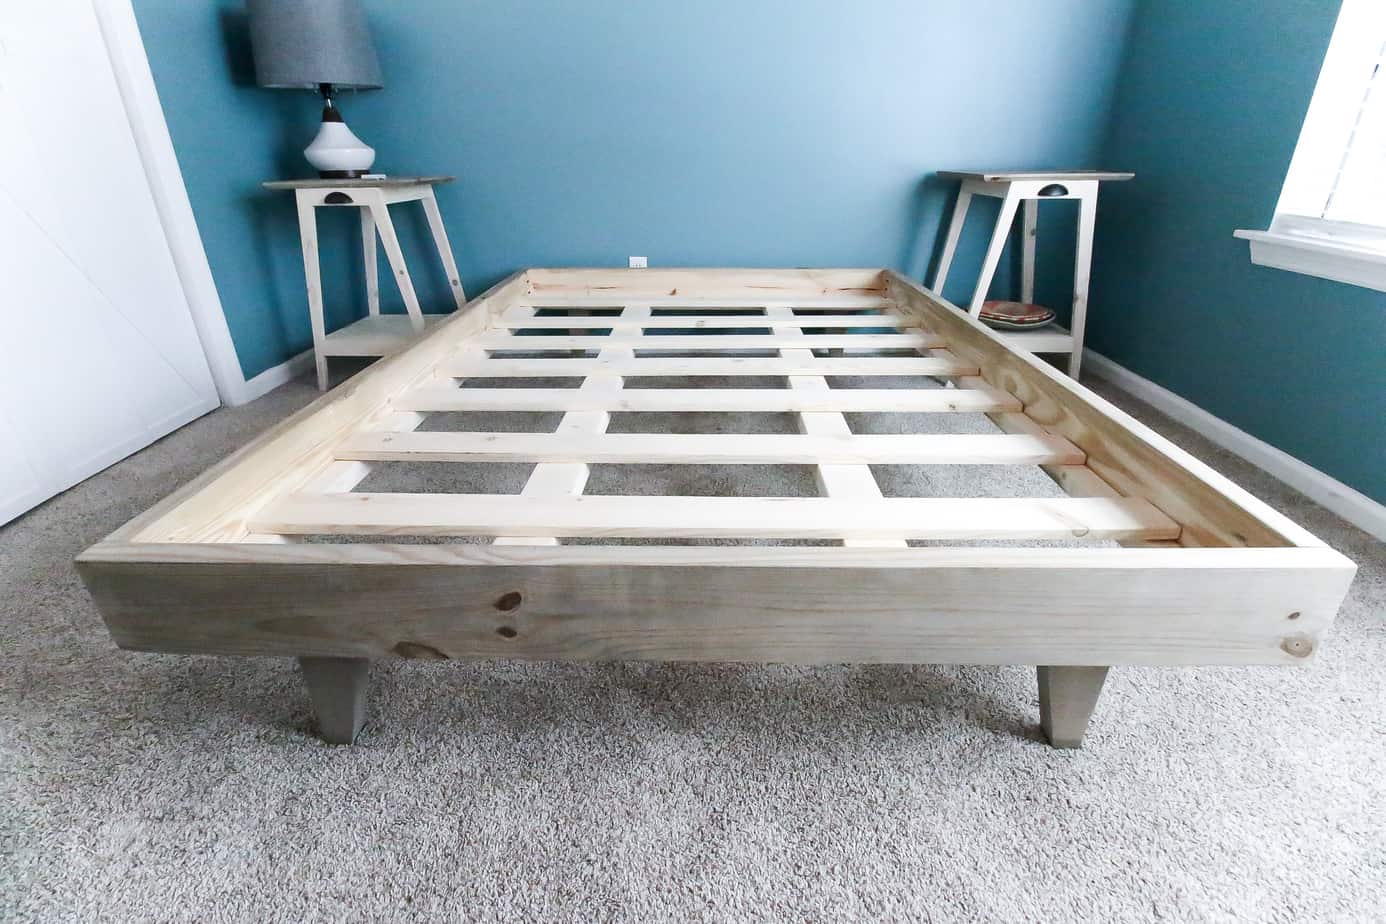 How To Build A Platform Bed For 50, Plans To Build A King Size Platform Bed